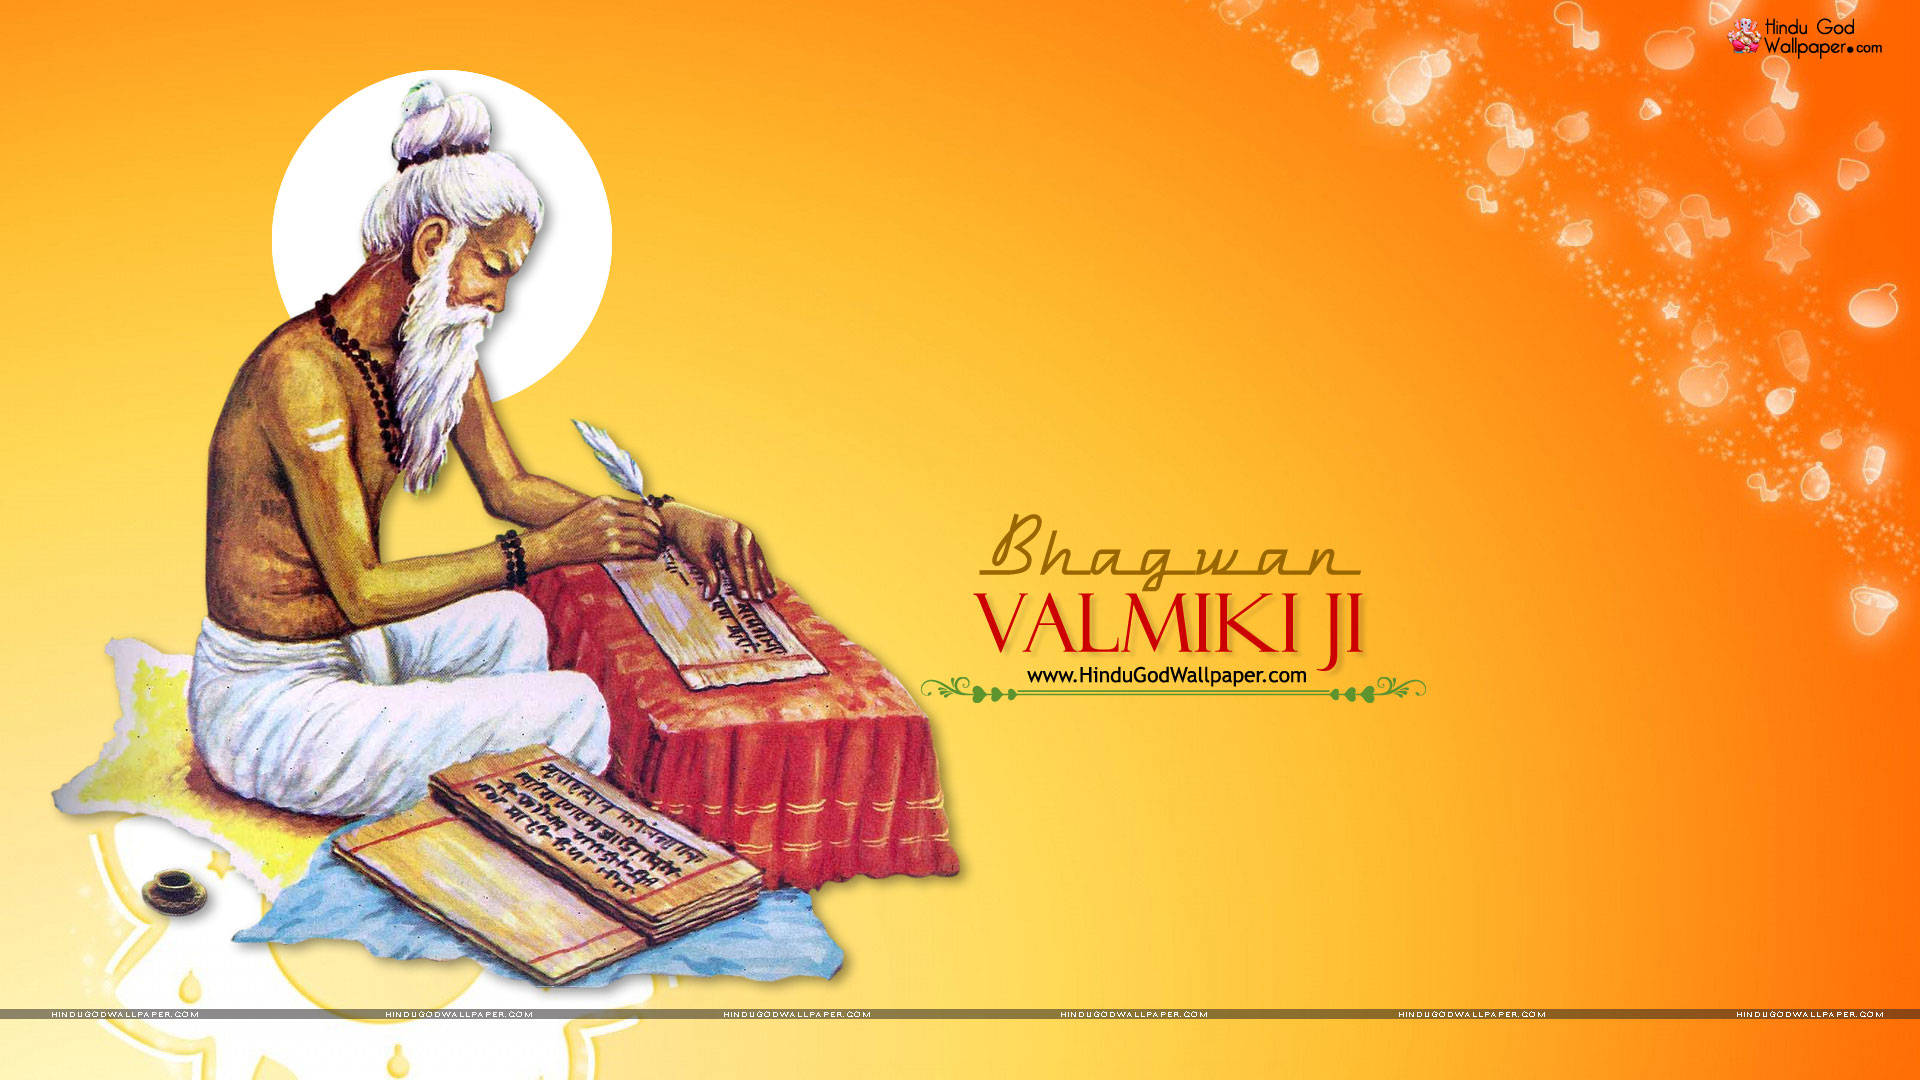 Caption: The Enlightened Saint Valmiki Composing His Renowned Epic